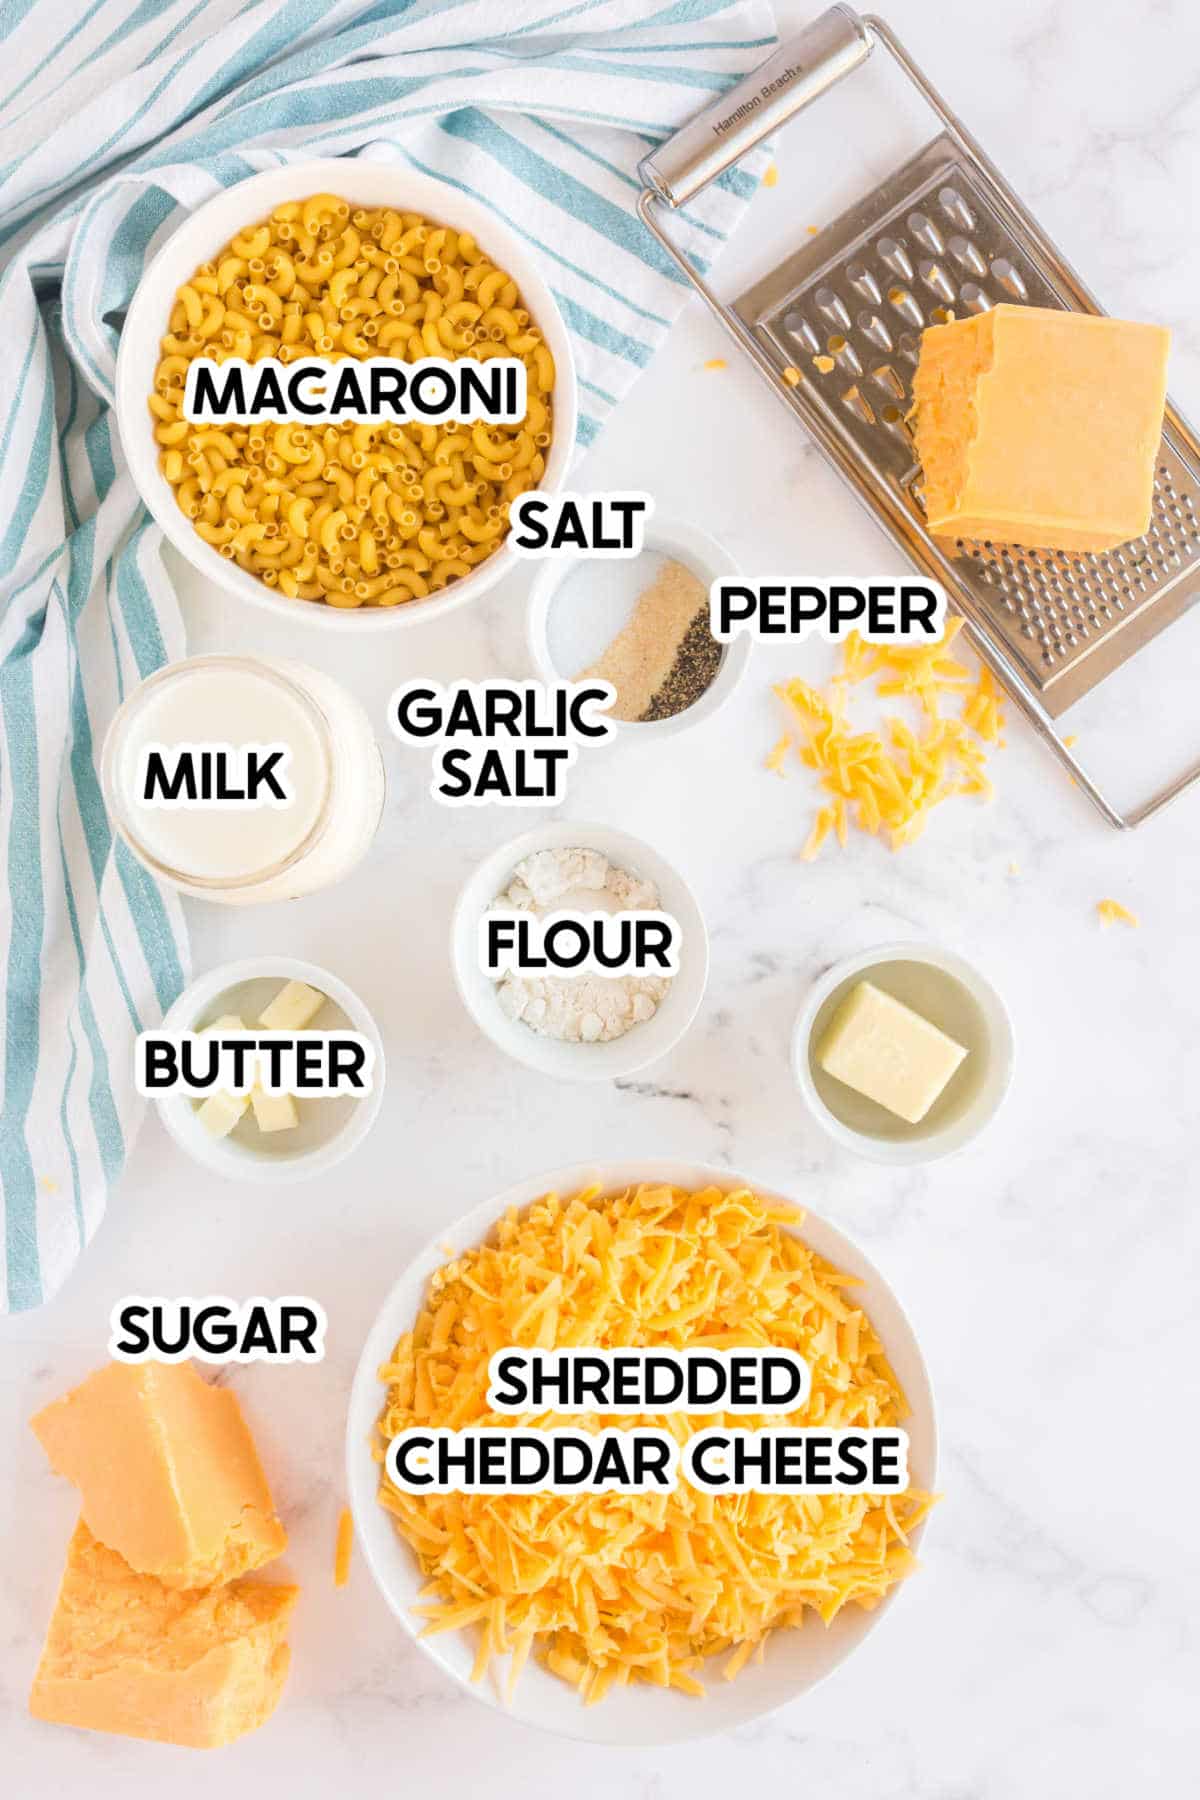 Ingredients for baked mac and cheese in bowls with labels